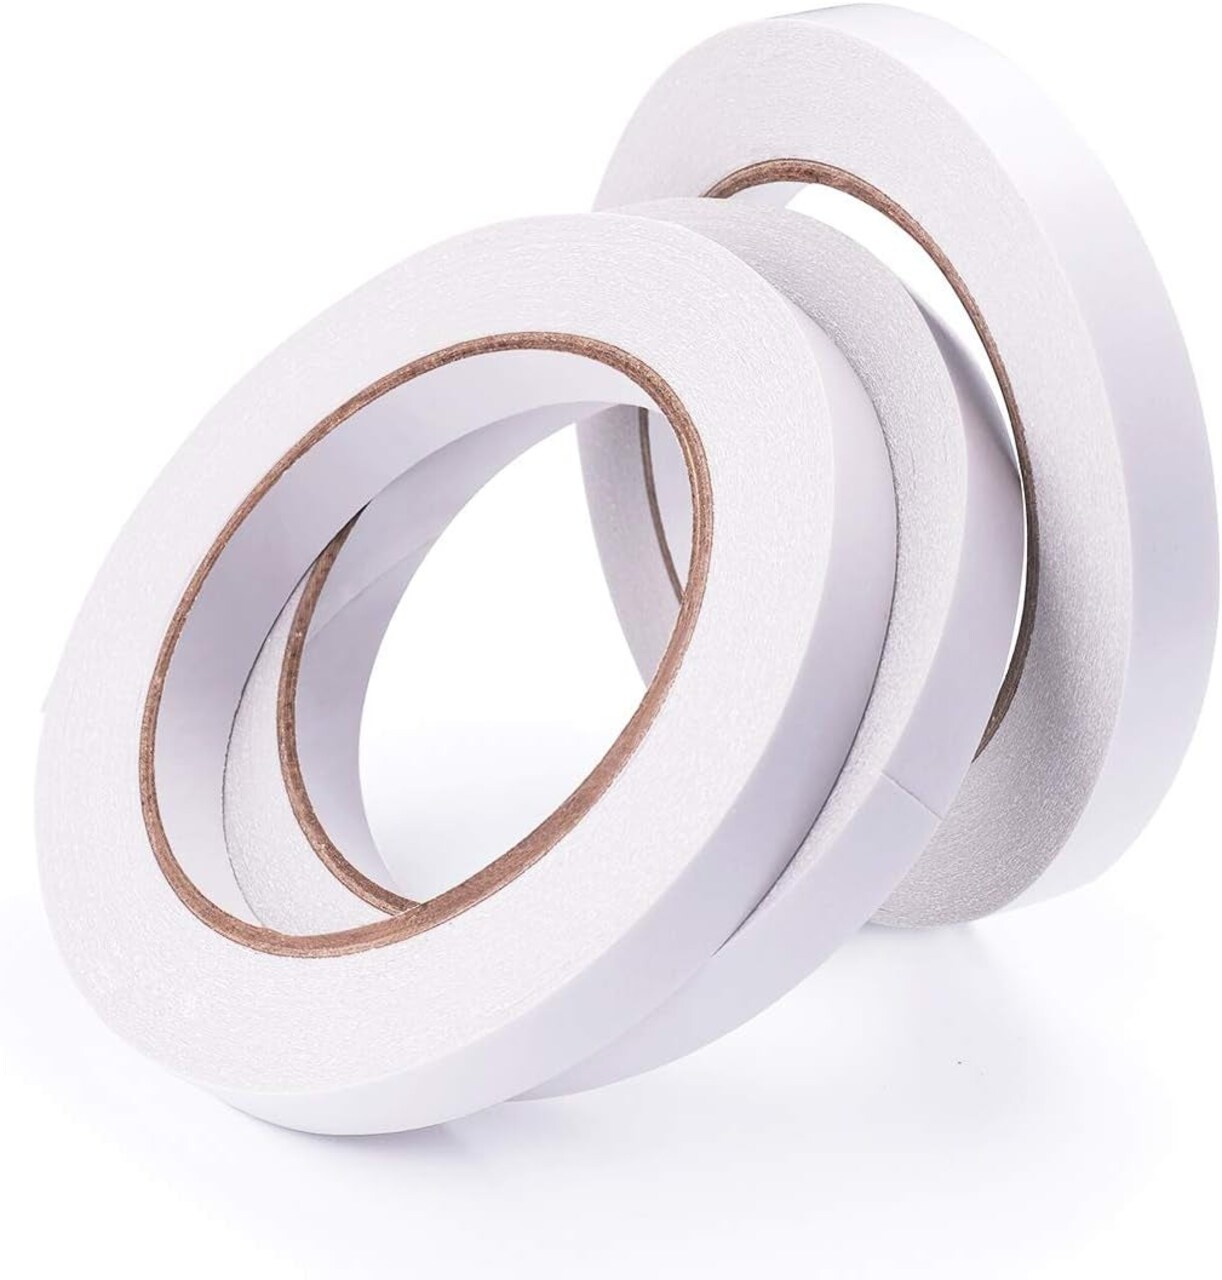 Double Sided Tape Clear Double-Sided Adhesive Tape Removable for